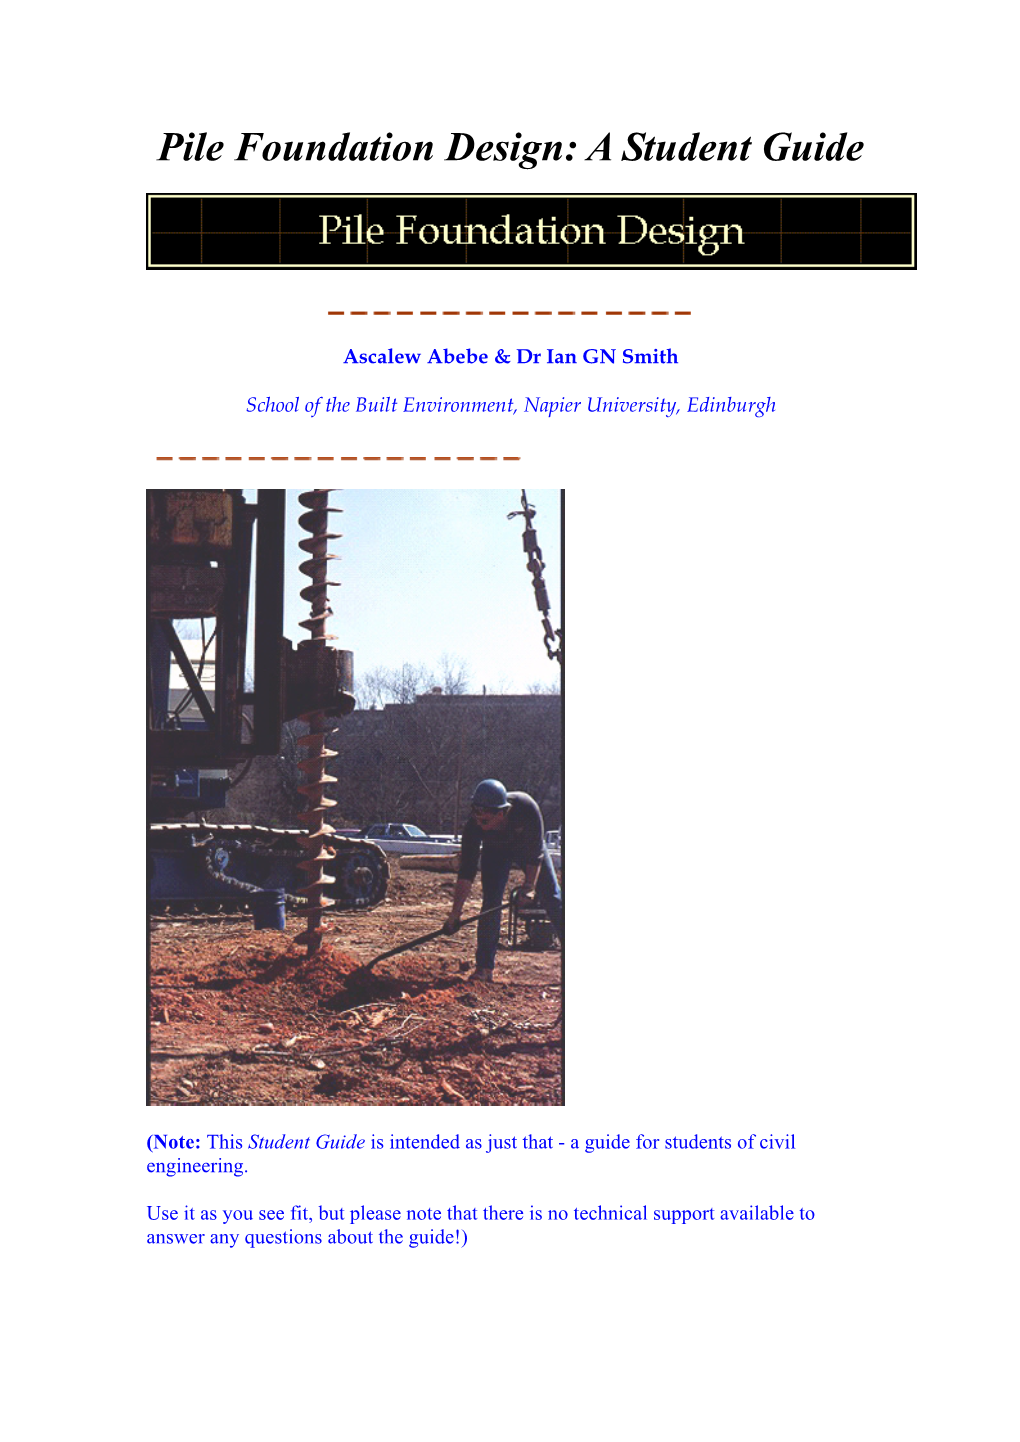 Pile Foundation Design: a Student Guide